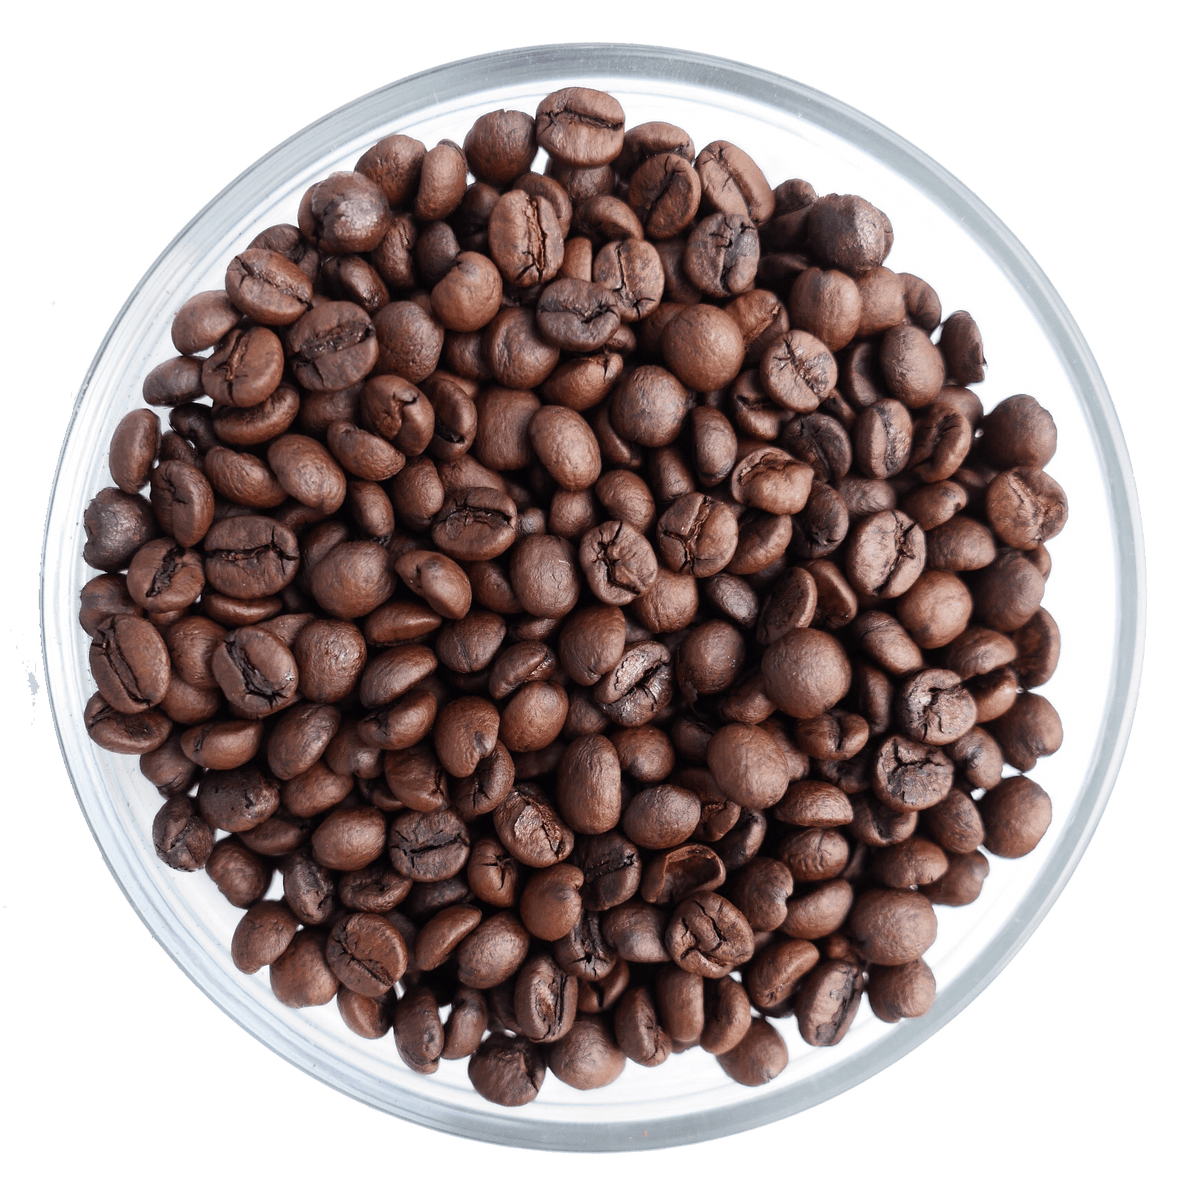 Size Matters: 'Cupped Coffee' Products in Korea Getting Bigger